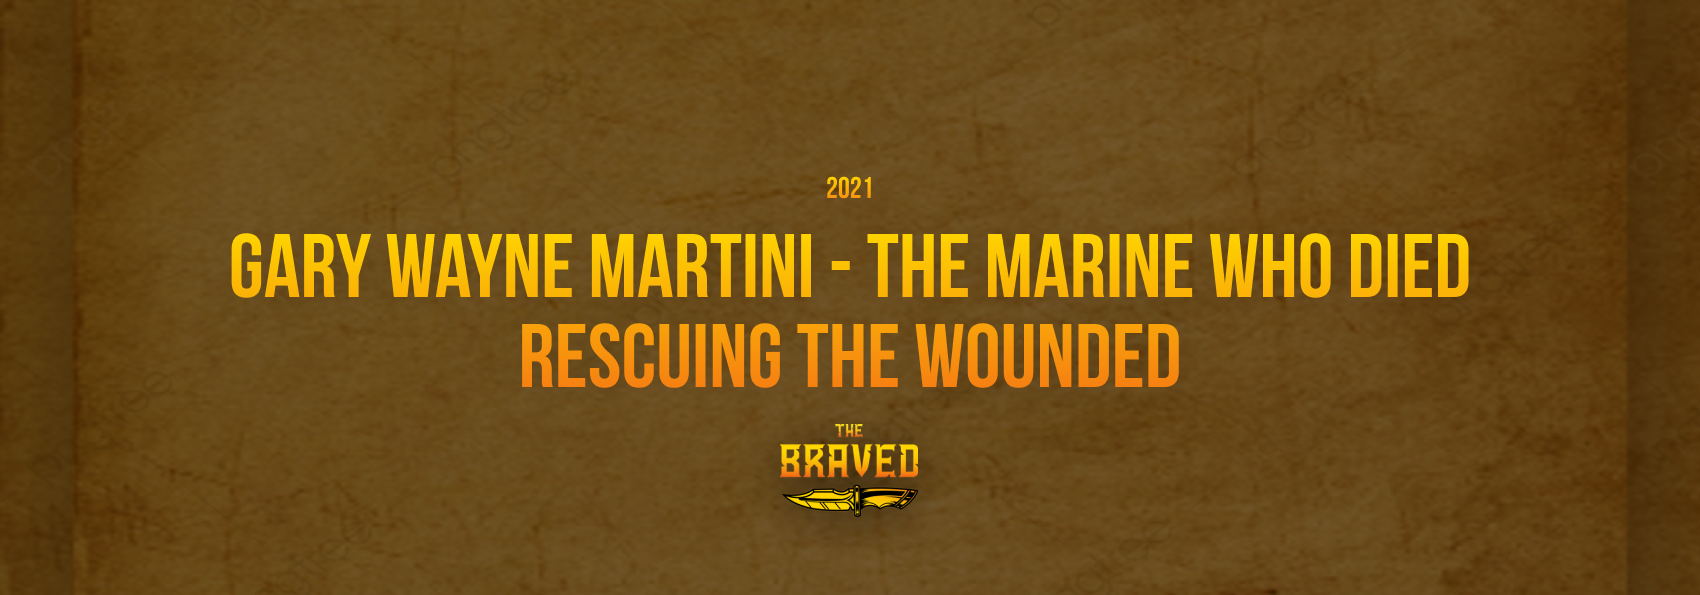 Gary Wayne Martini - The Marine Who Died Rescuing the Wounded